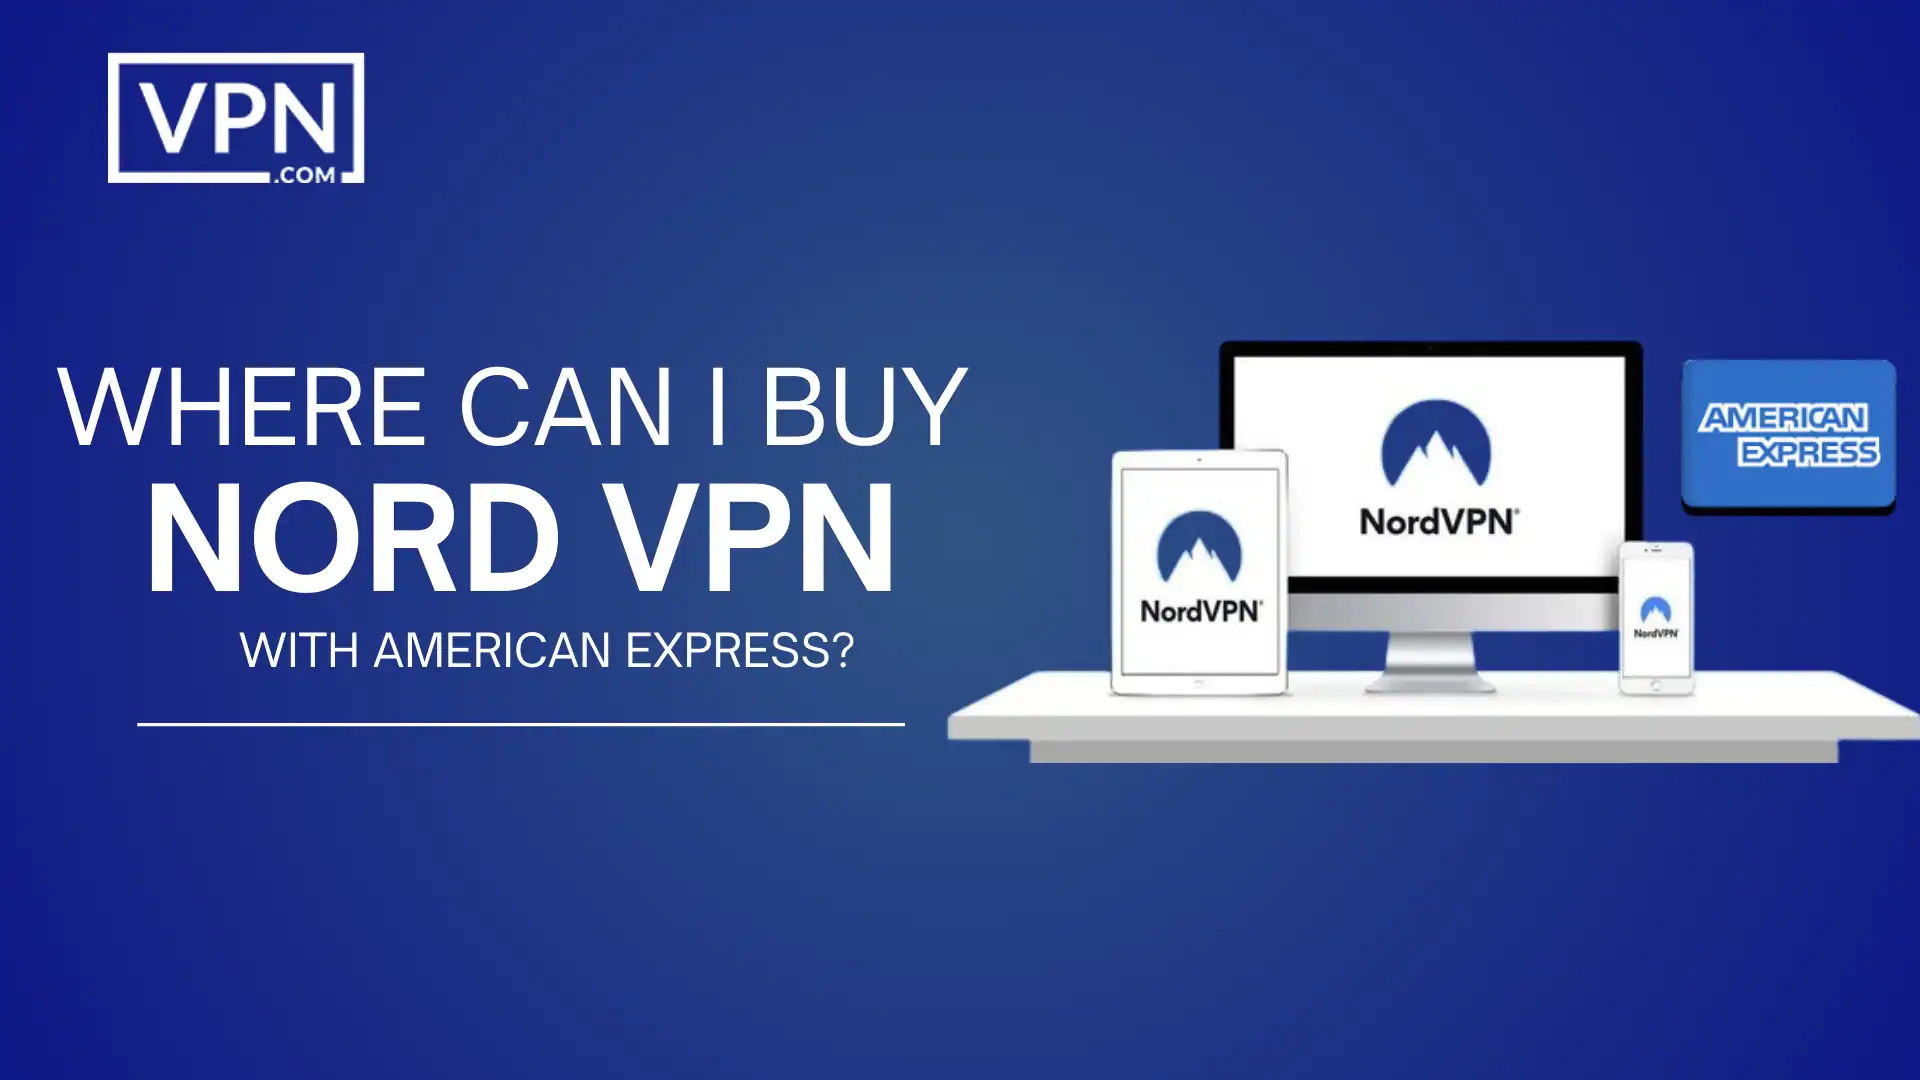 How To Buy NordVPN With American Express?